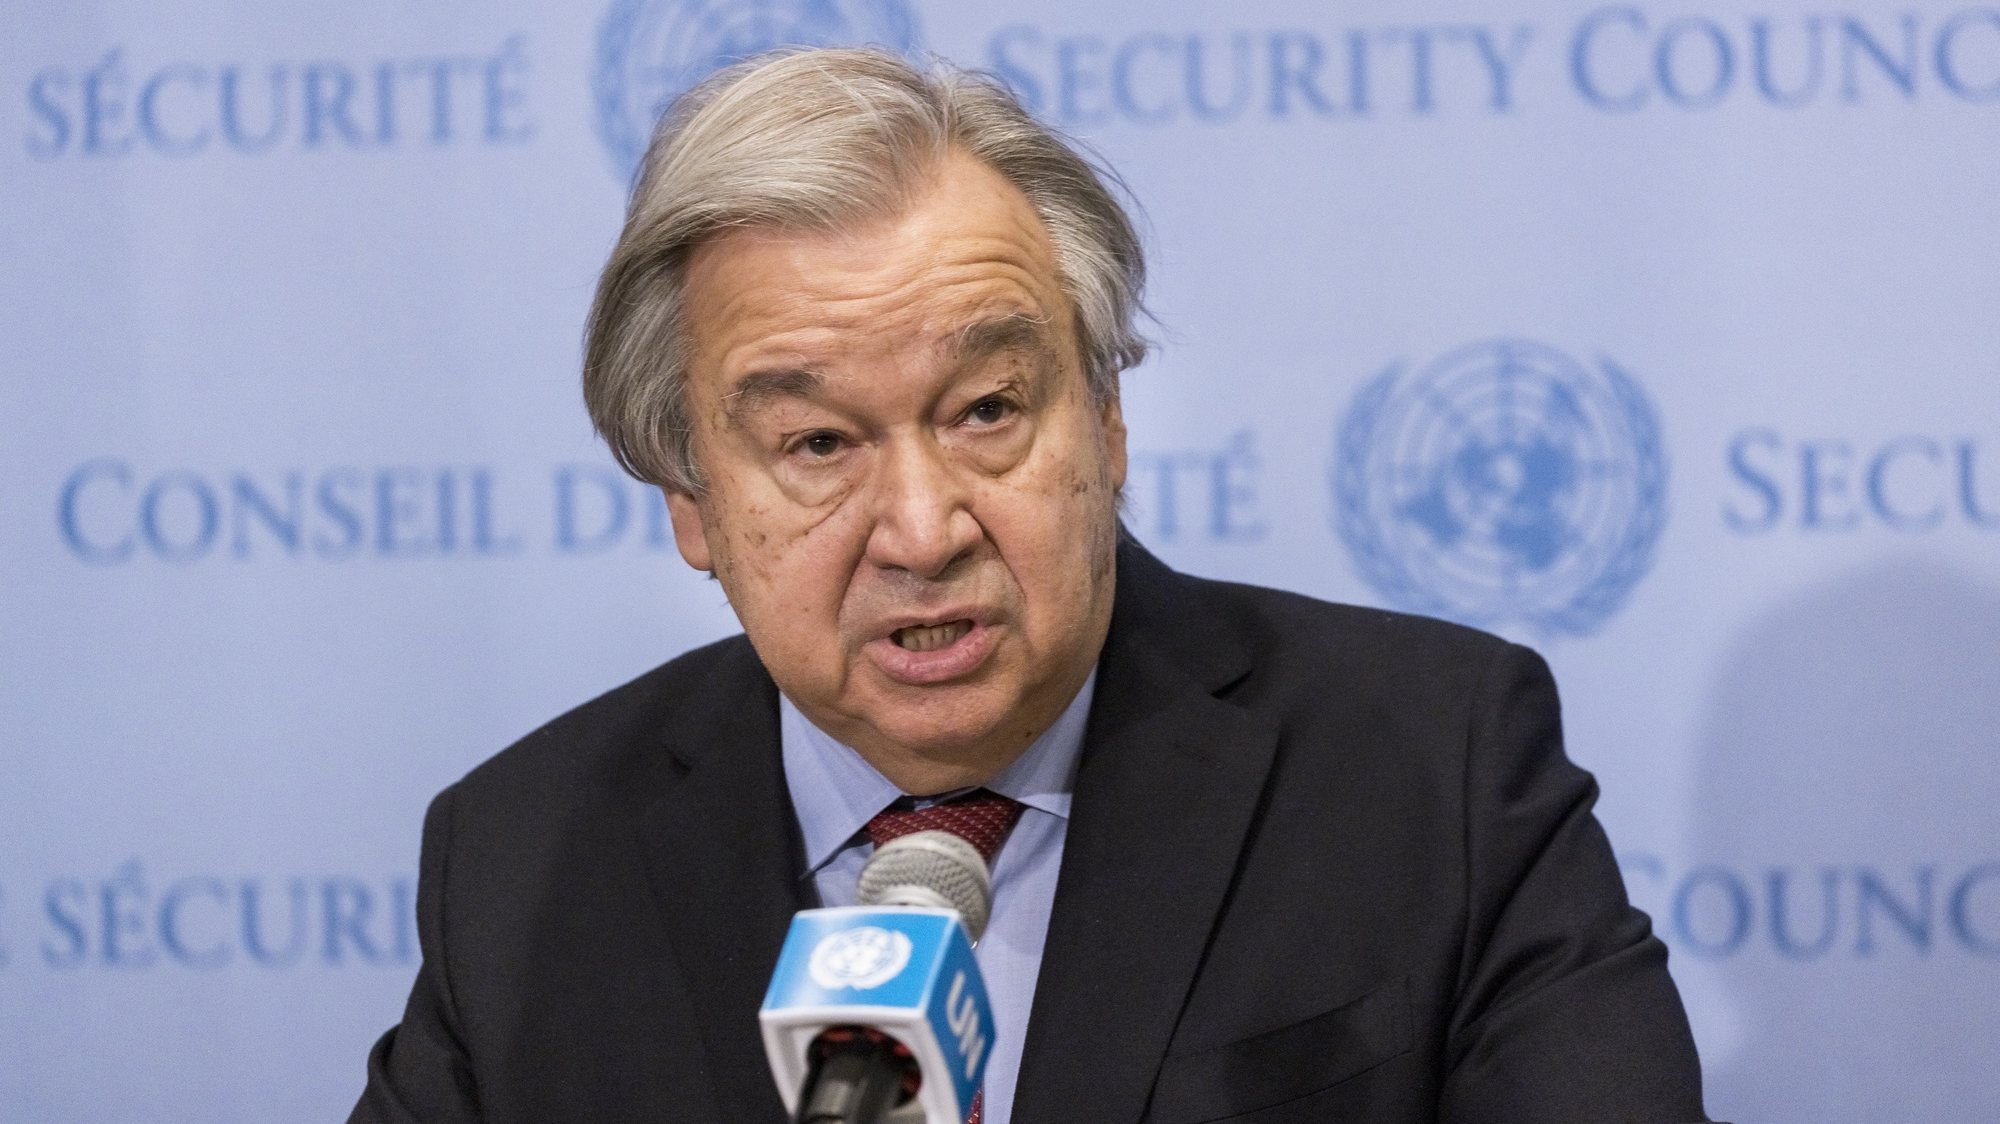 epa09856152 United Nations Secretary-General Antonio Guterres talks with reporters about UN efforts to help broker a humanitarian ceasefire between Russia and Ukraine at United Nations headquarters in New York, New York, USA, 28 March 2022.  EPA/JUSTIN LANE